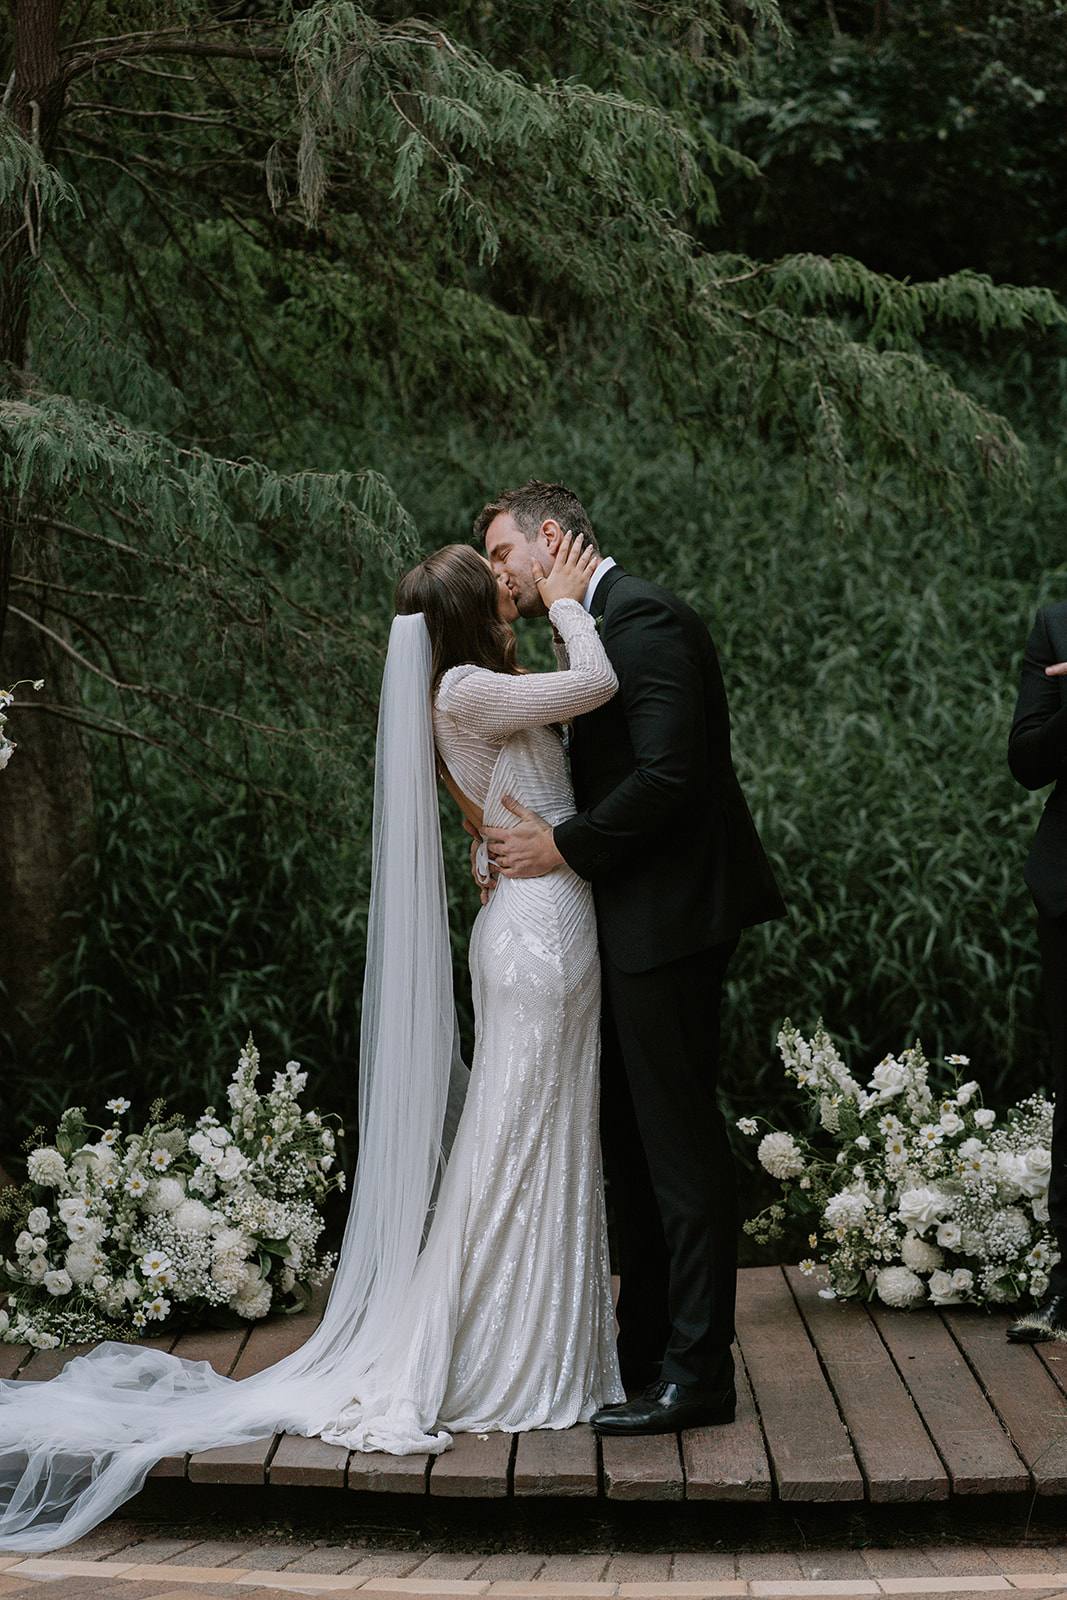 First kiss during the ceremony of Izzy and Rhys at Bundaleer Rainforest Gardens.